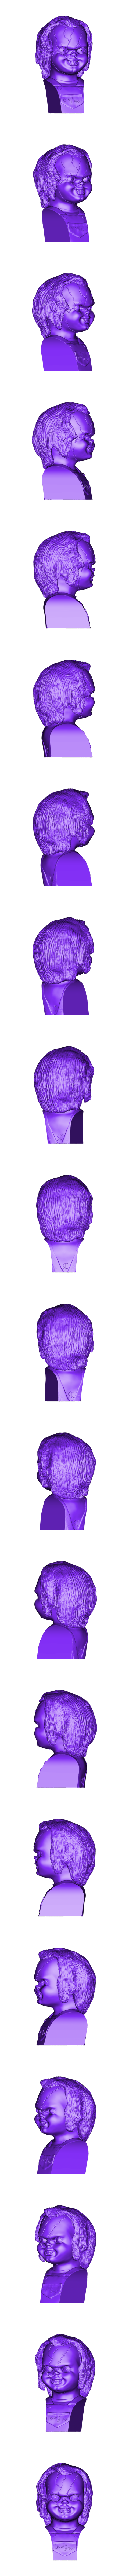 Chucky_Buste_repaired.obj Download free OBJ file Chucky Bust • Design to 3D print, Snorri